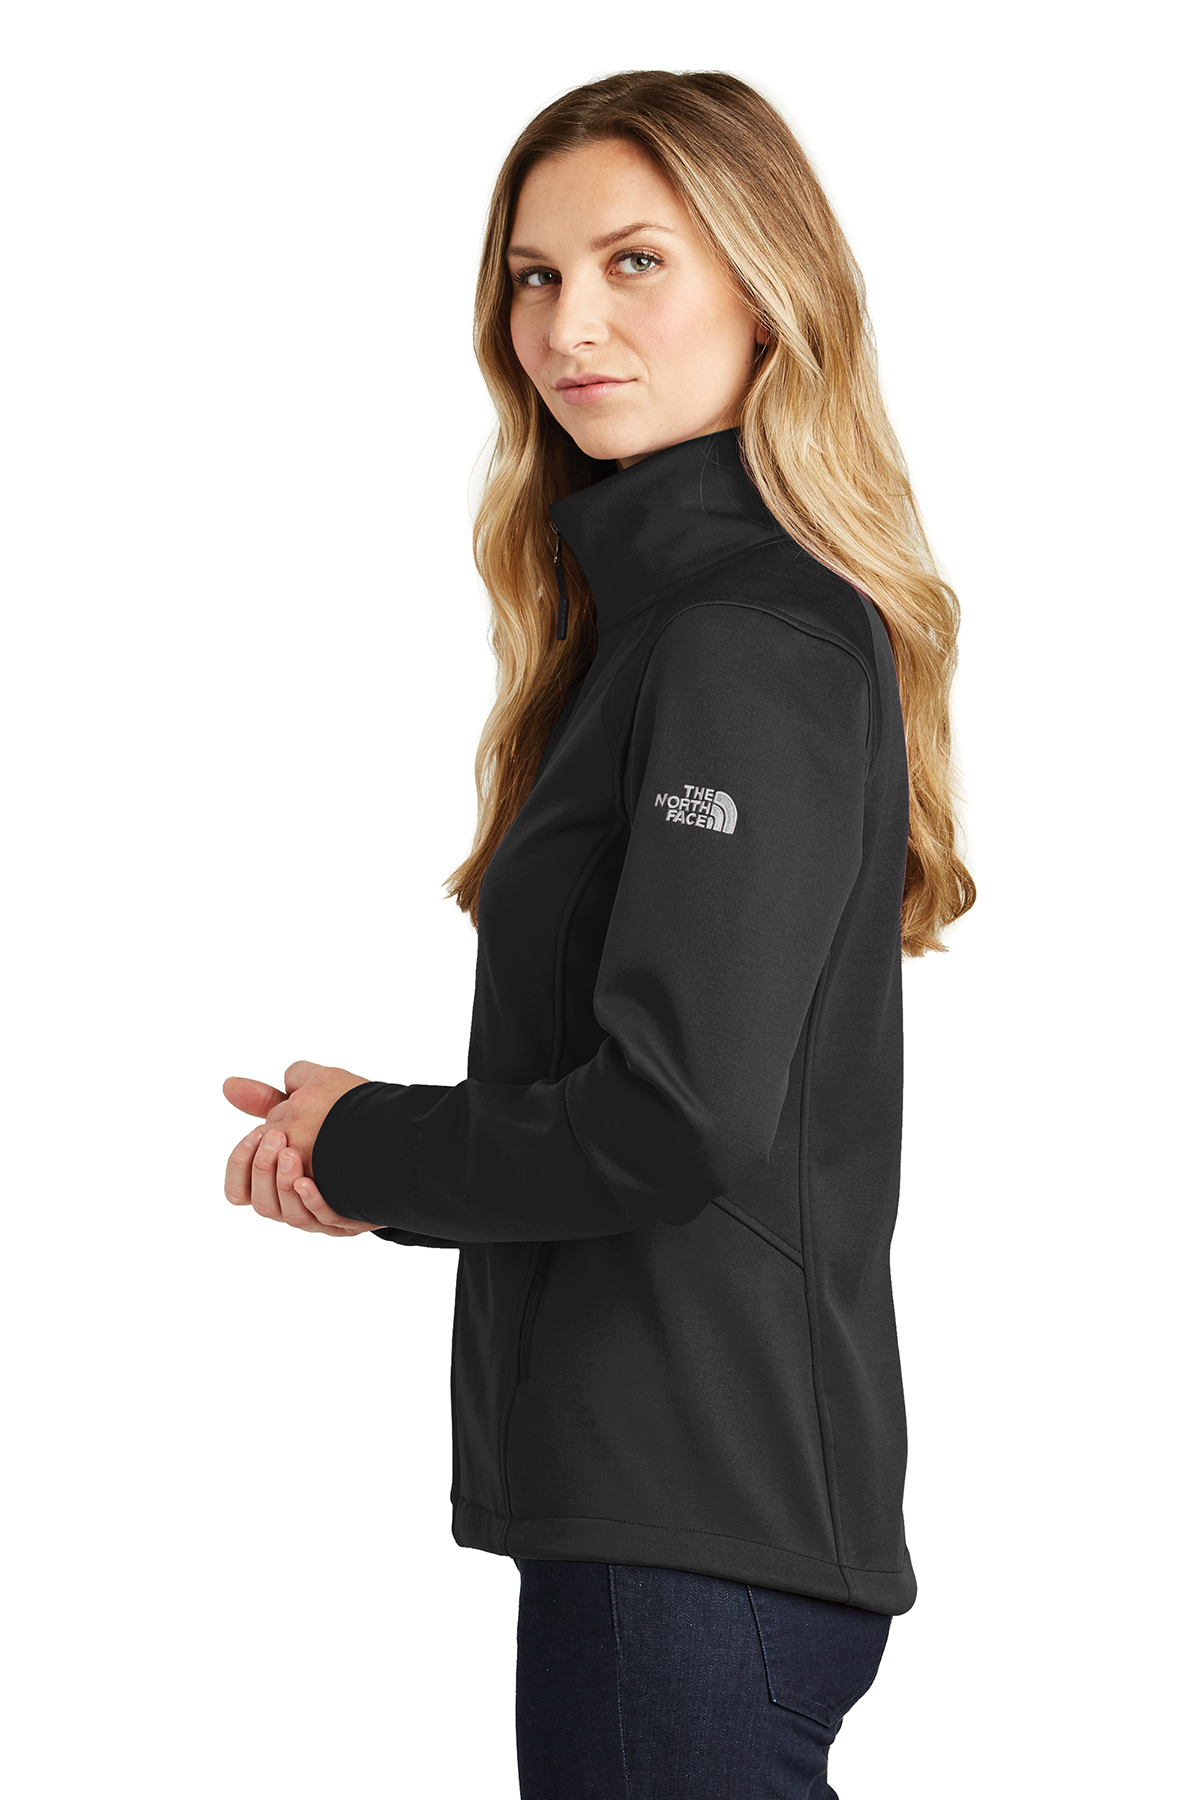 The North Face ® Ladies Ridgewall Soft Shell Jacket | Product | Company ...